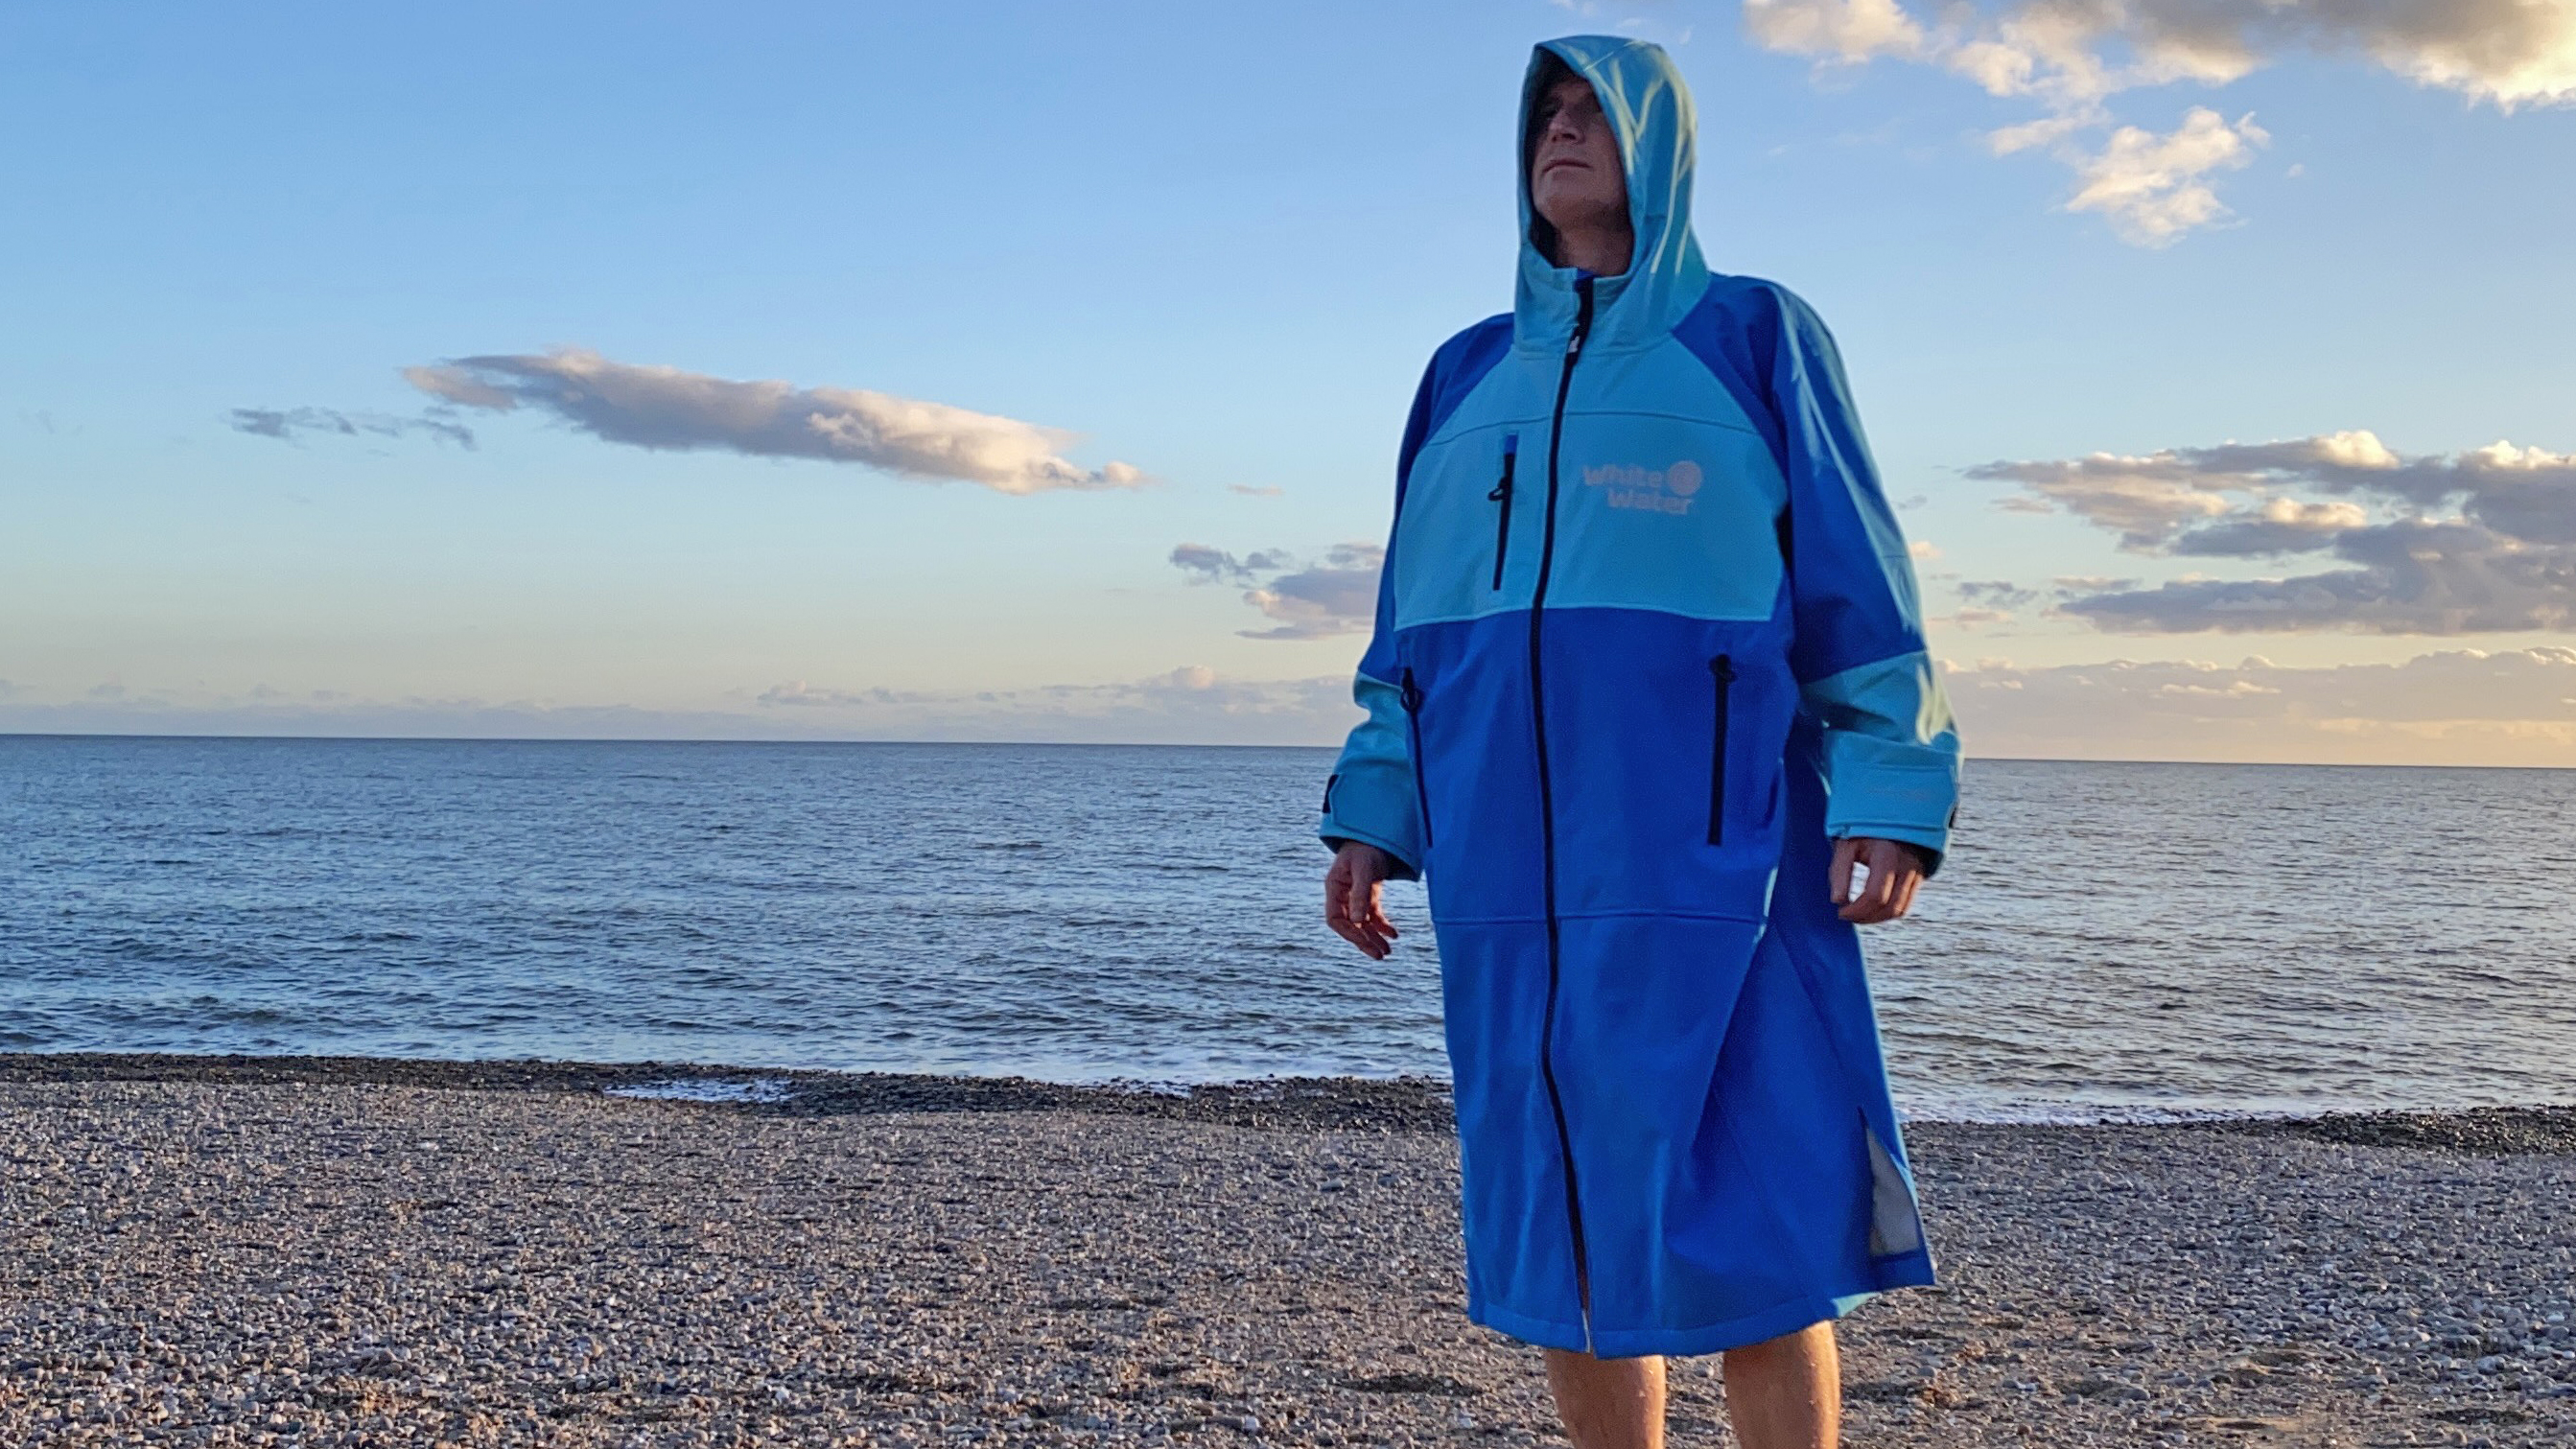 Pat Kinsella wearing the Whitewater Softshell Robe on a pebble beach